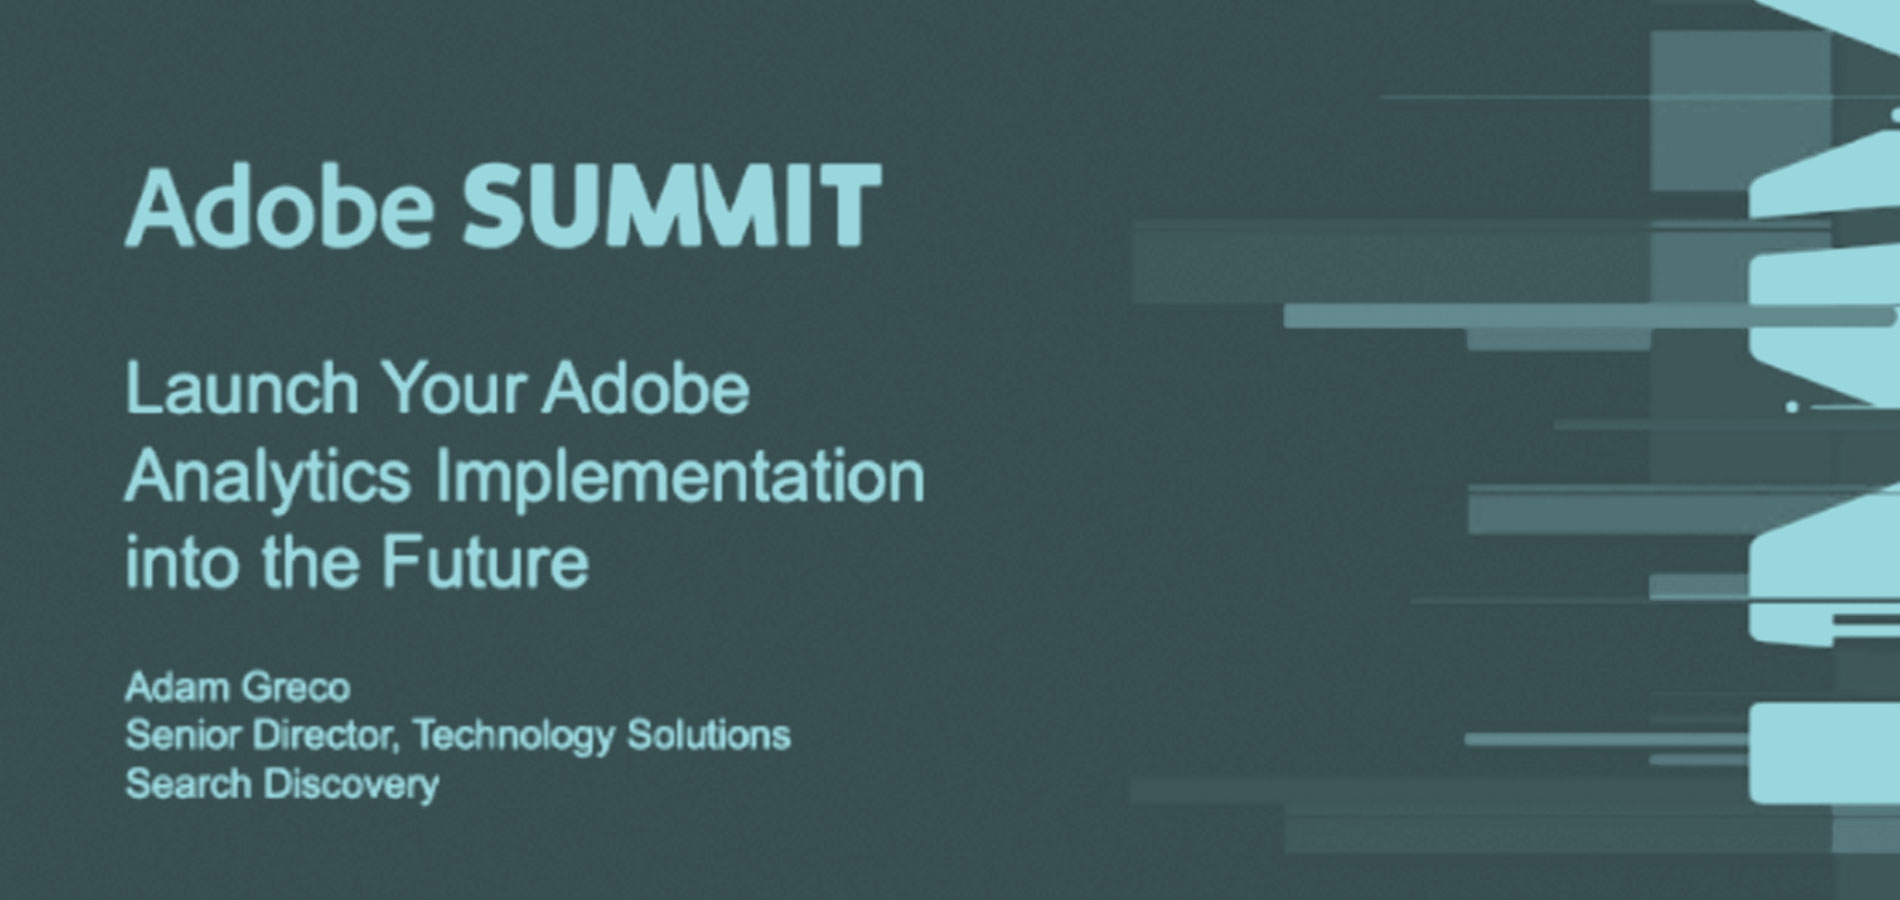 Launch Your Adobe Analytics Implementation into the Future Apollo